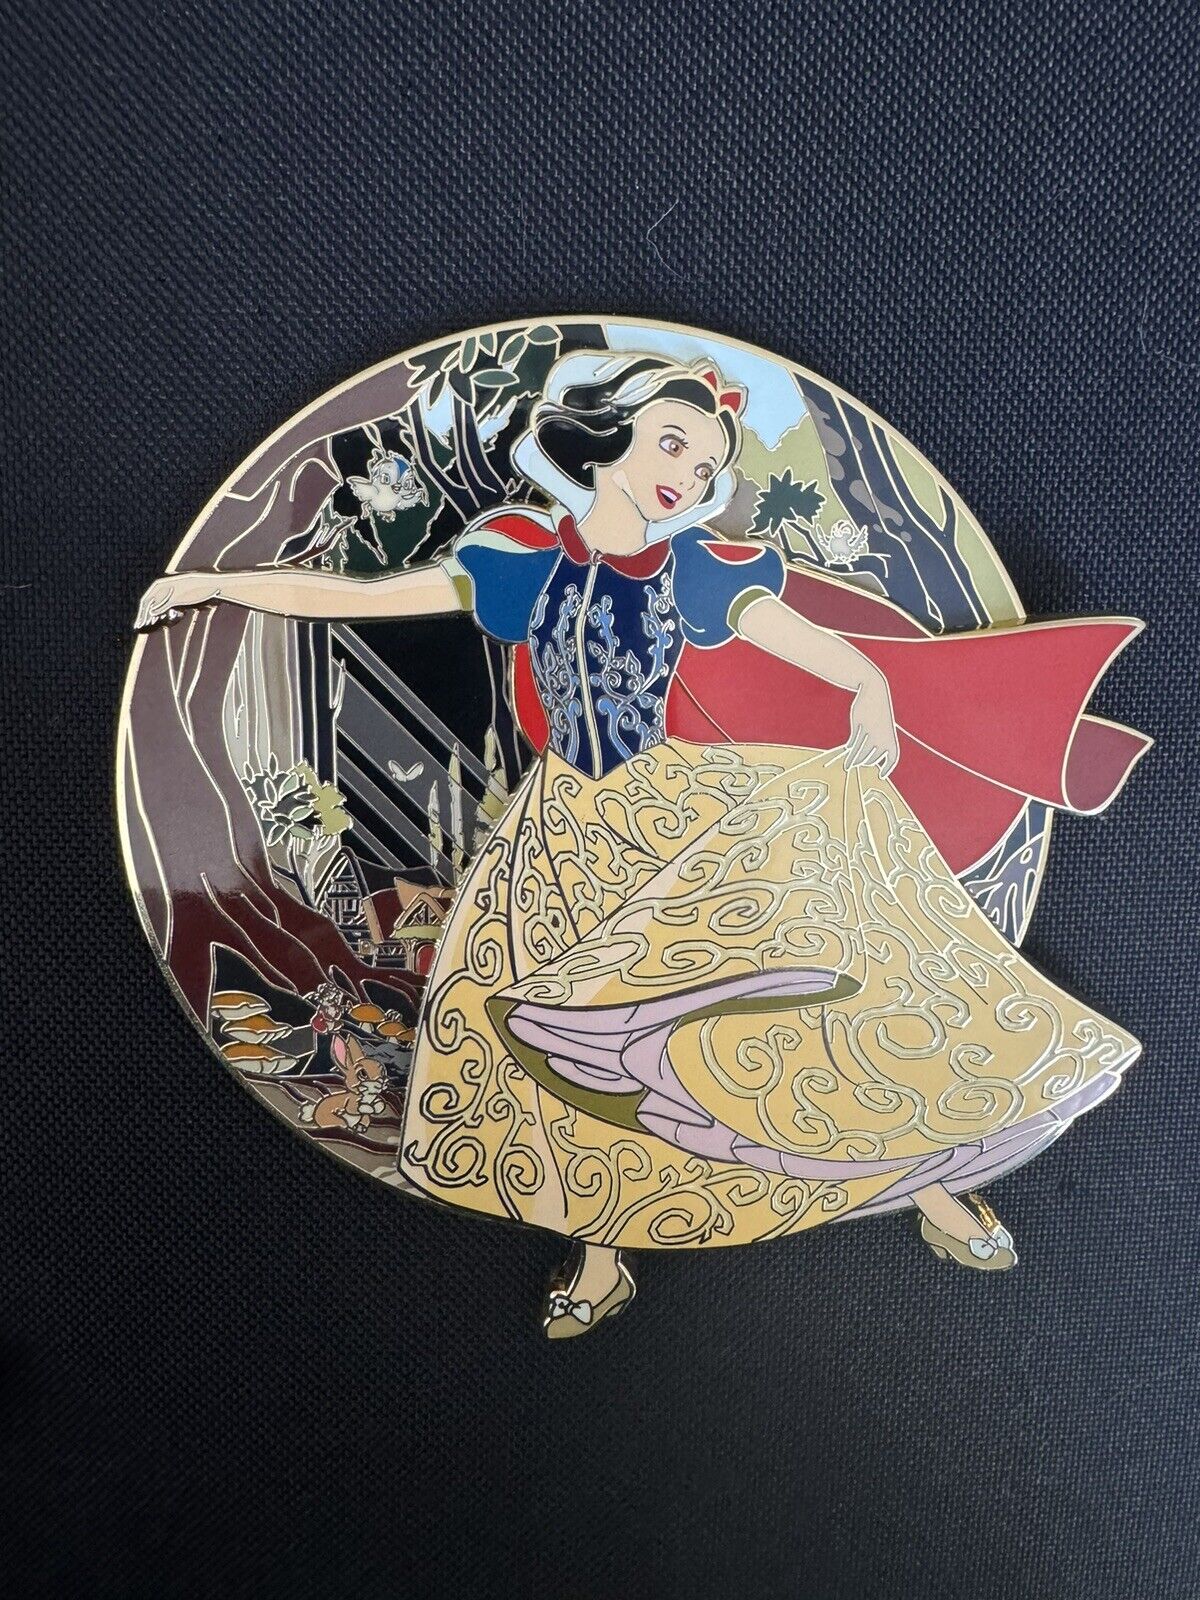 Snow White Disney Fantasy Pin Limited Edition Pastel Shooting Star Co